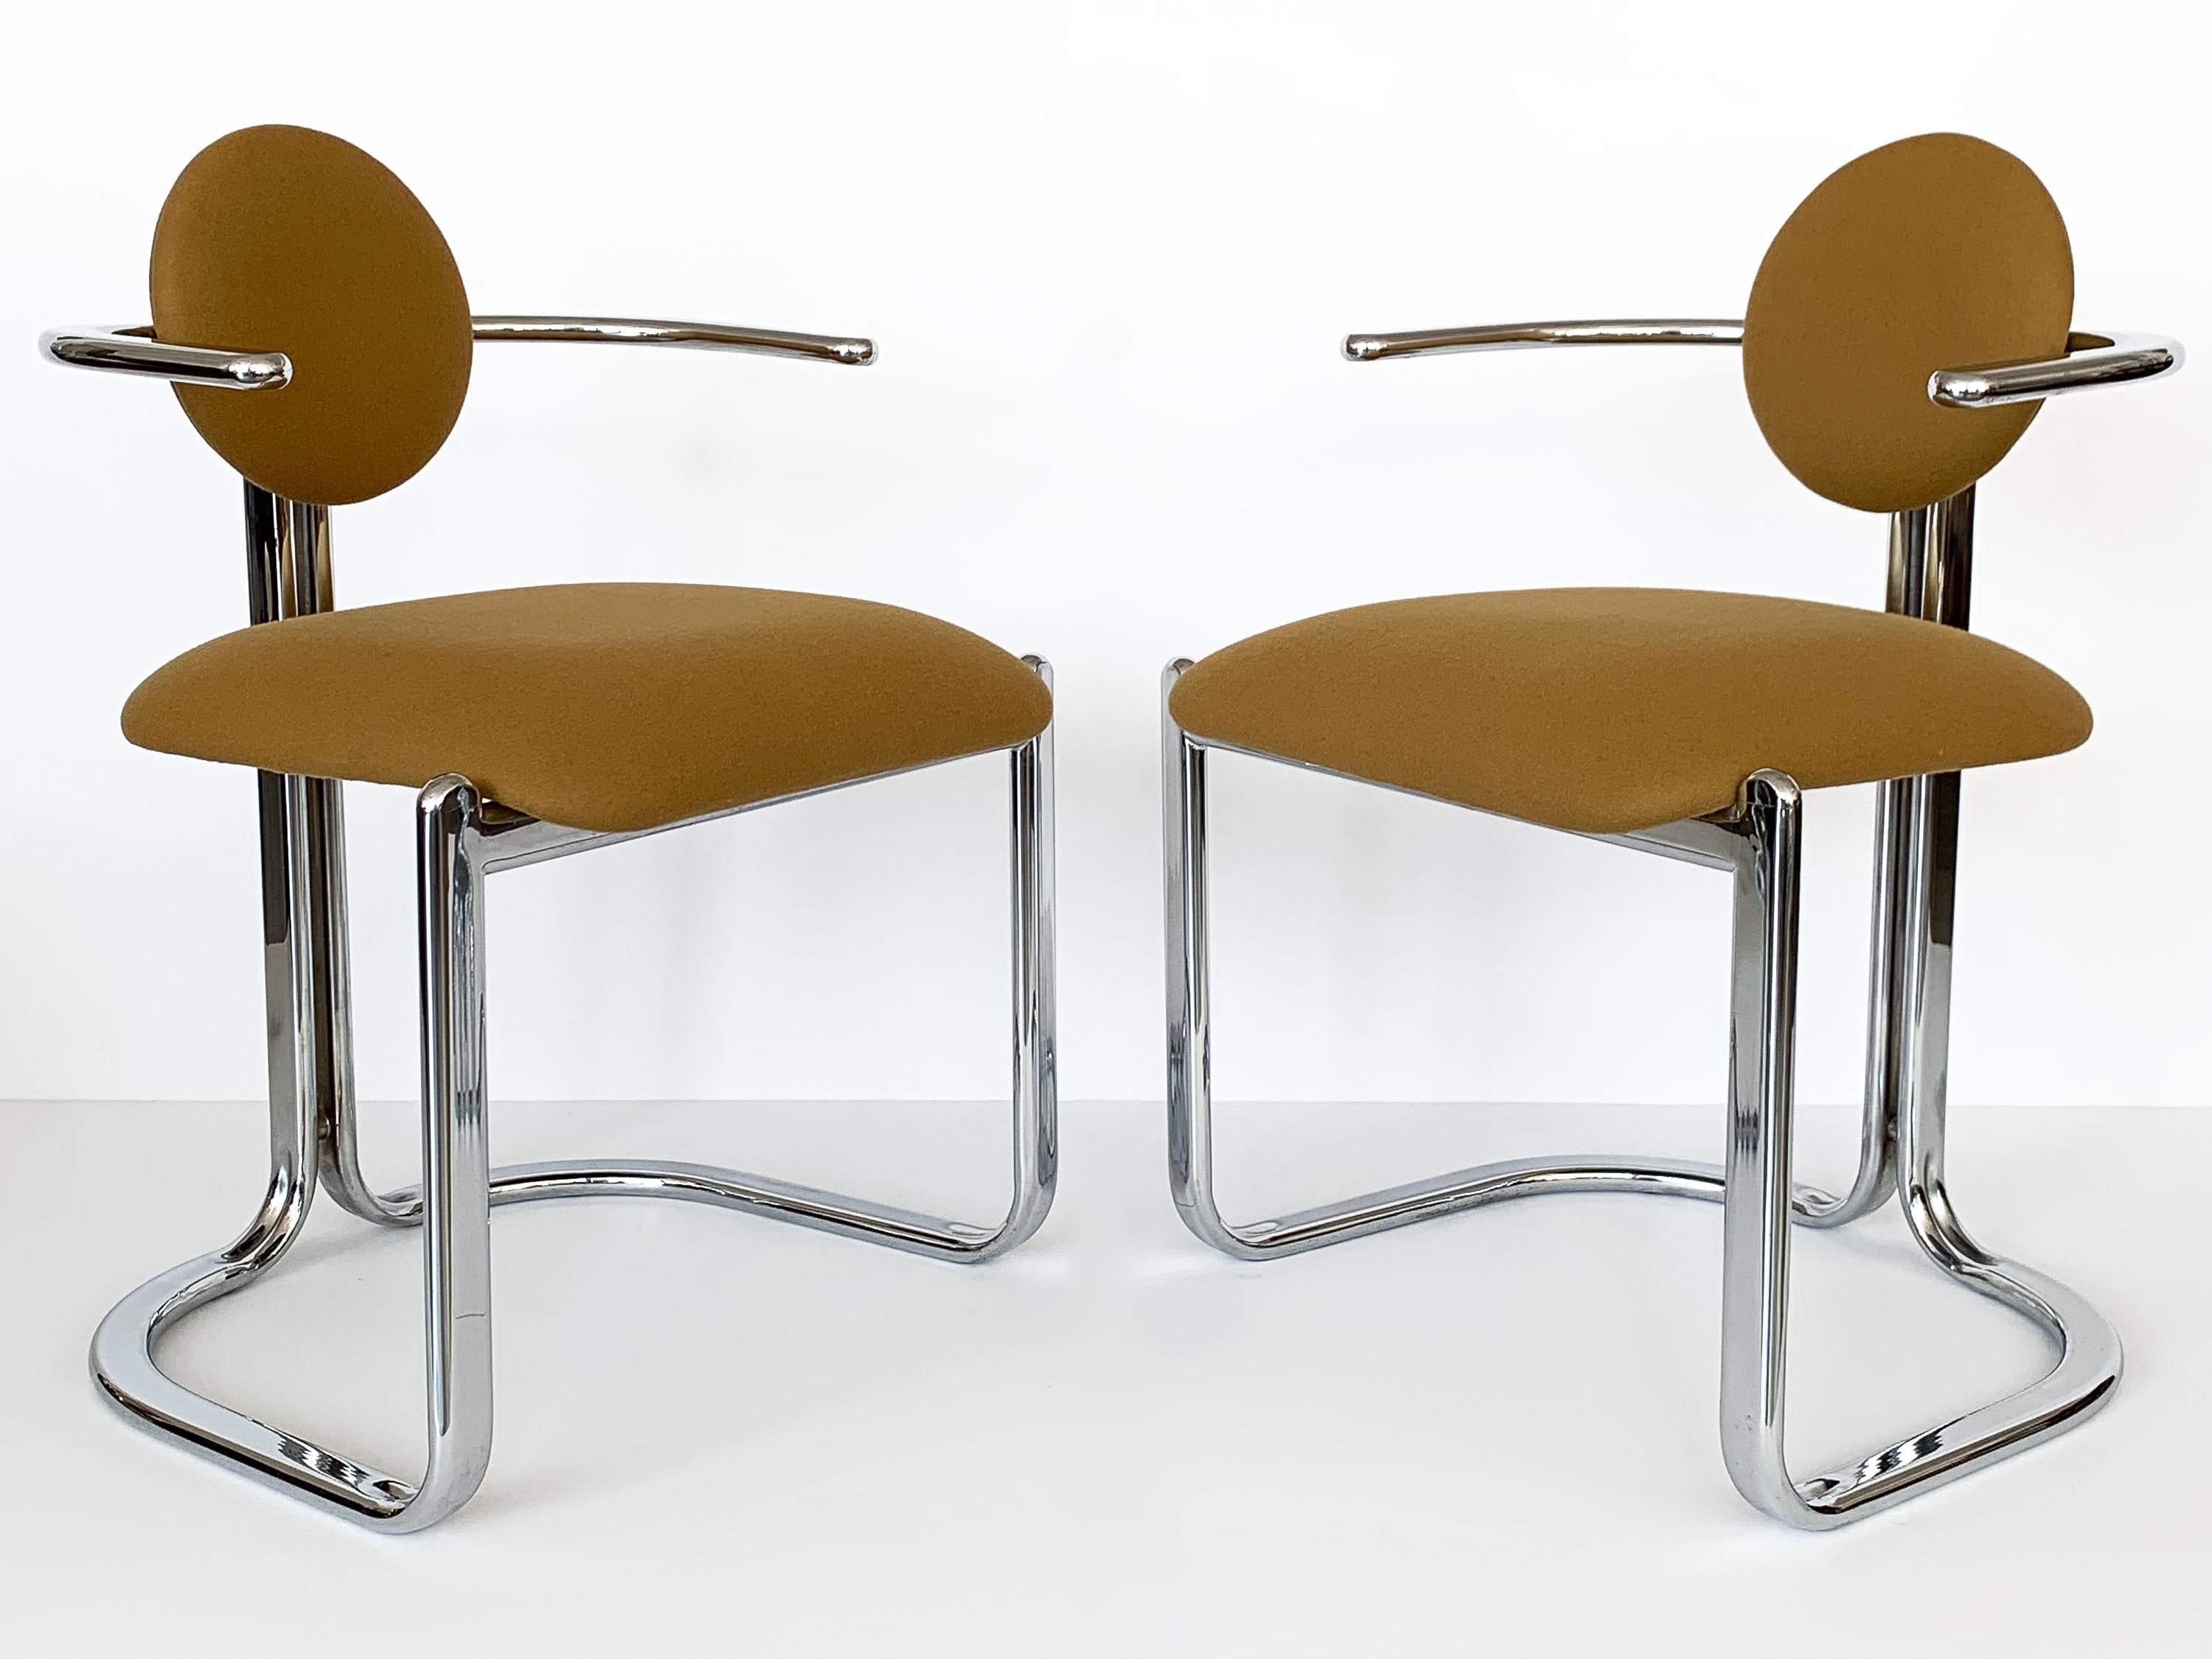 Pair of chrome modernist armchairs by Gastone Rinadli for Thema Italy, circa 1970s. Newly upholstered in a camel colored wool felt fabric. Postmodern in style with a 10